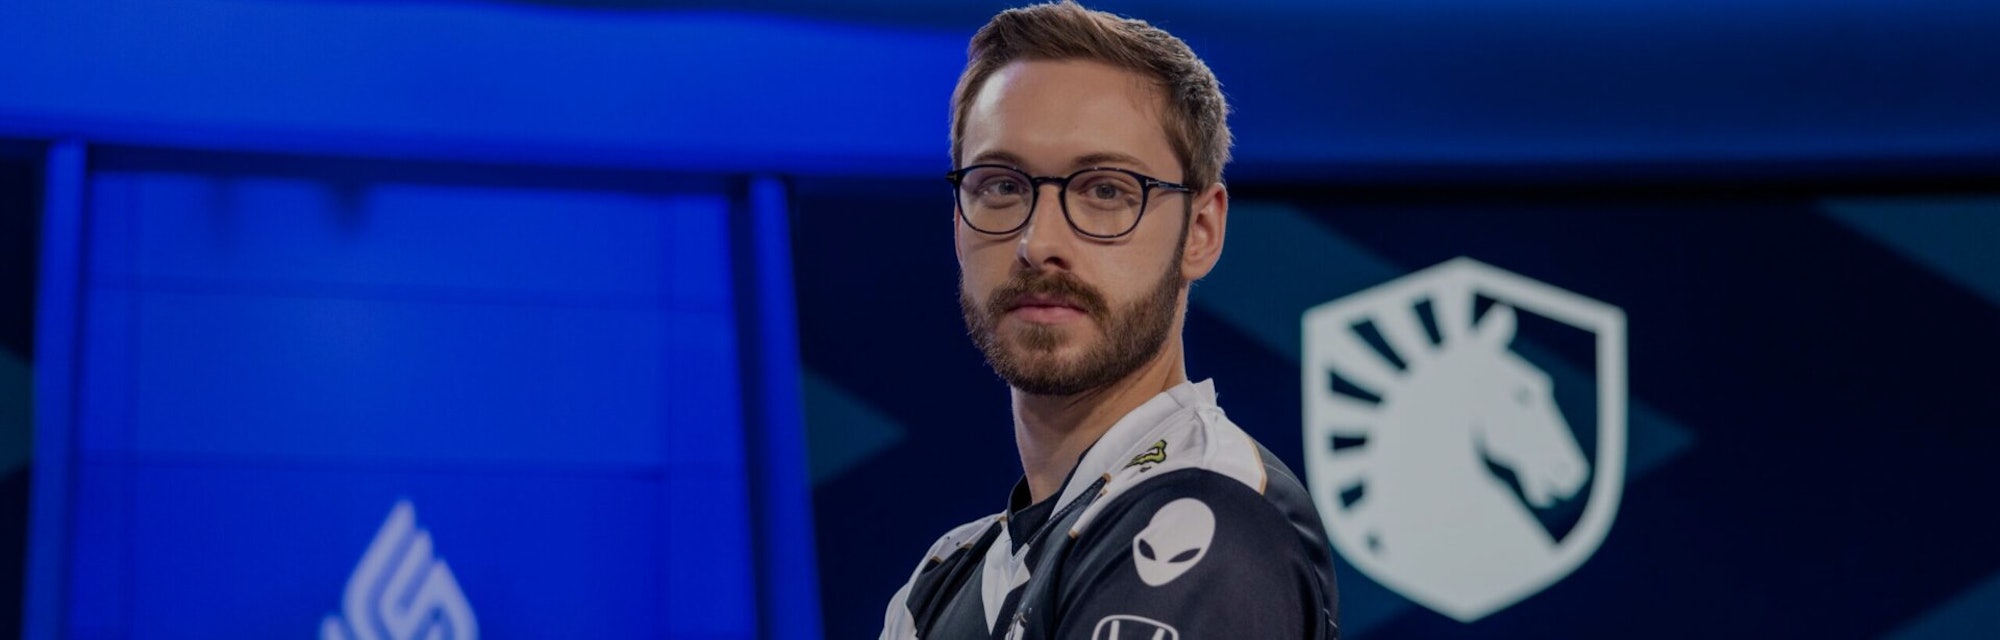 A photo of Bjergsen with his arms crossed